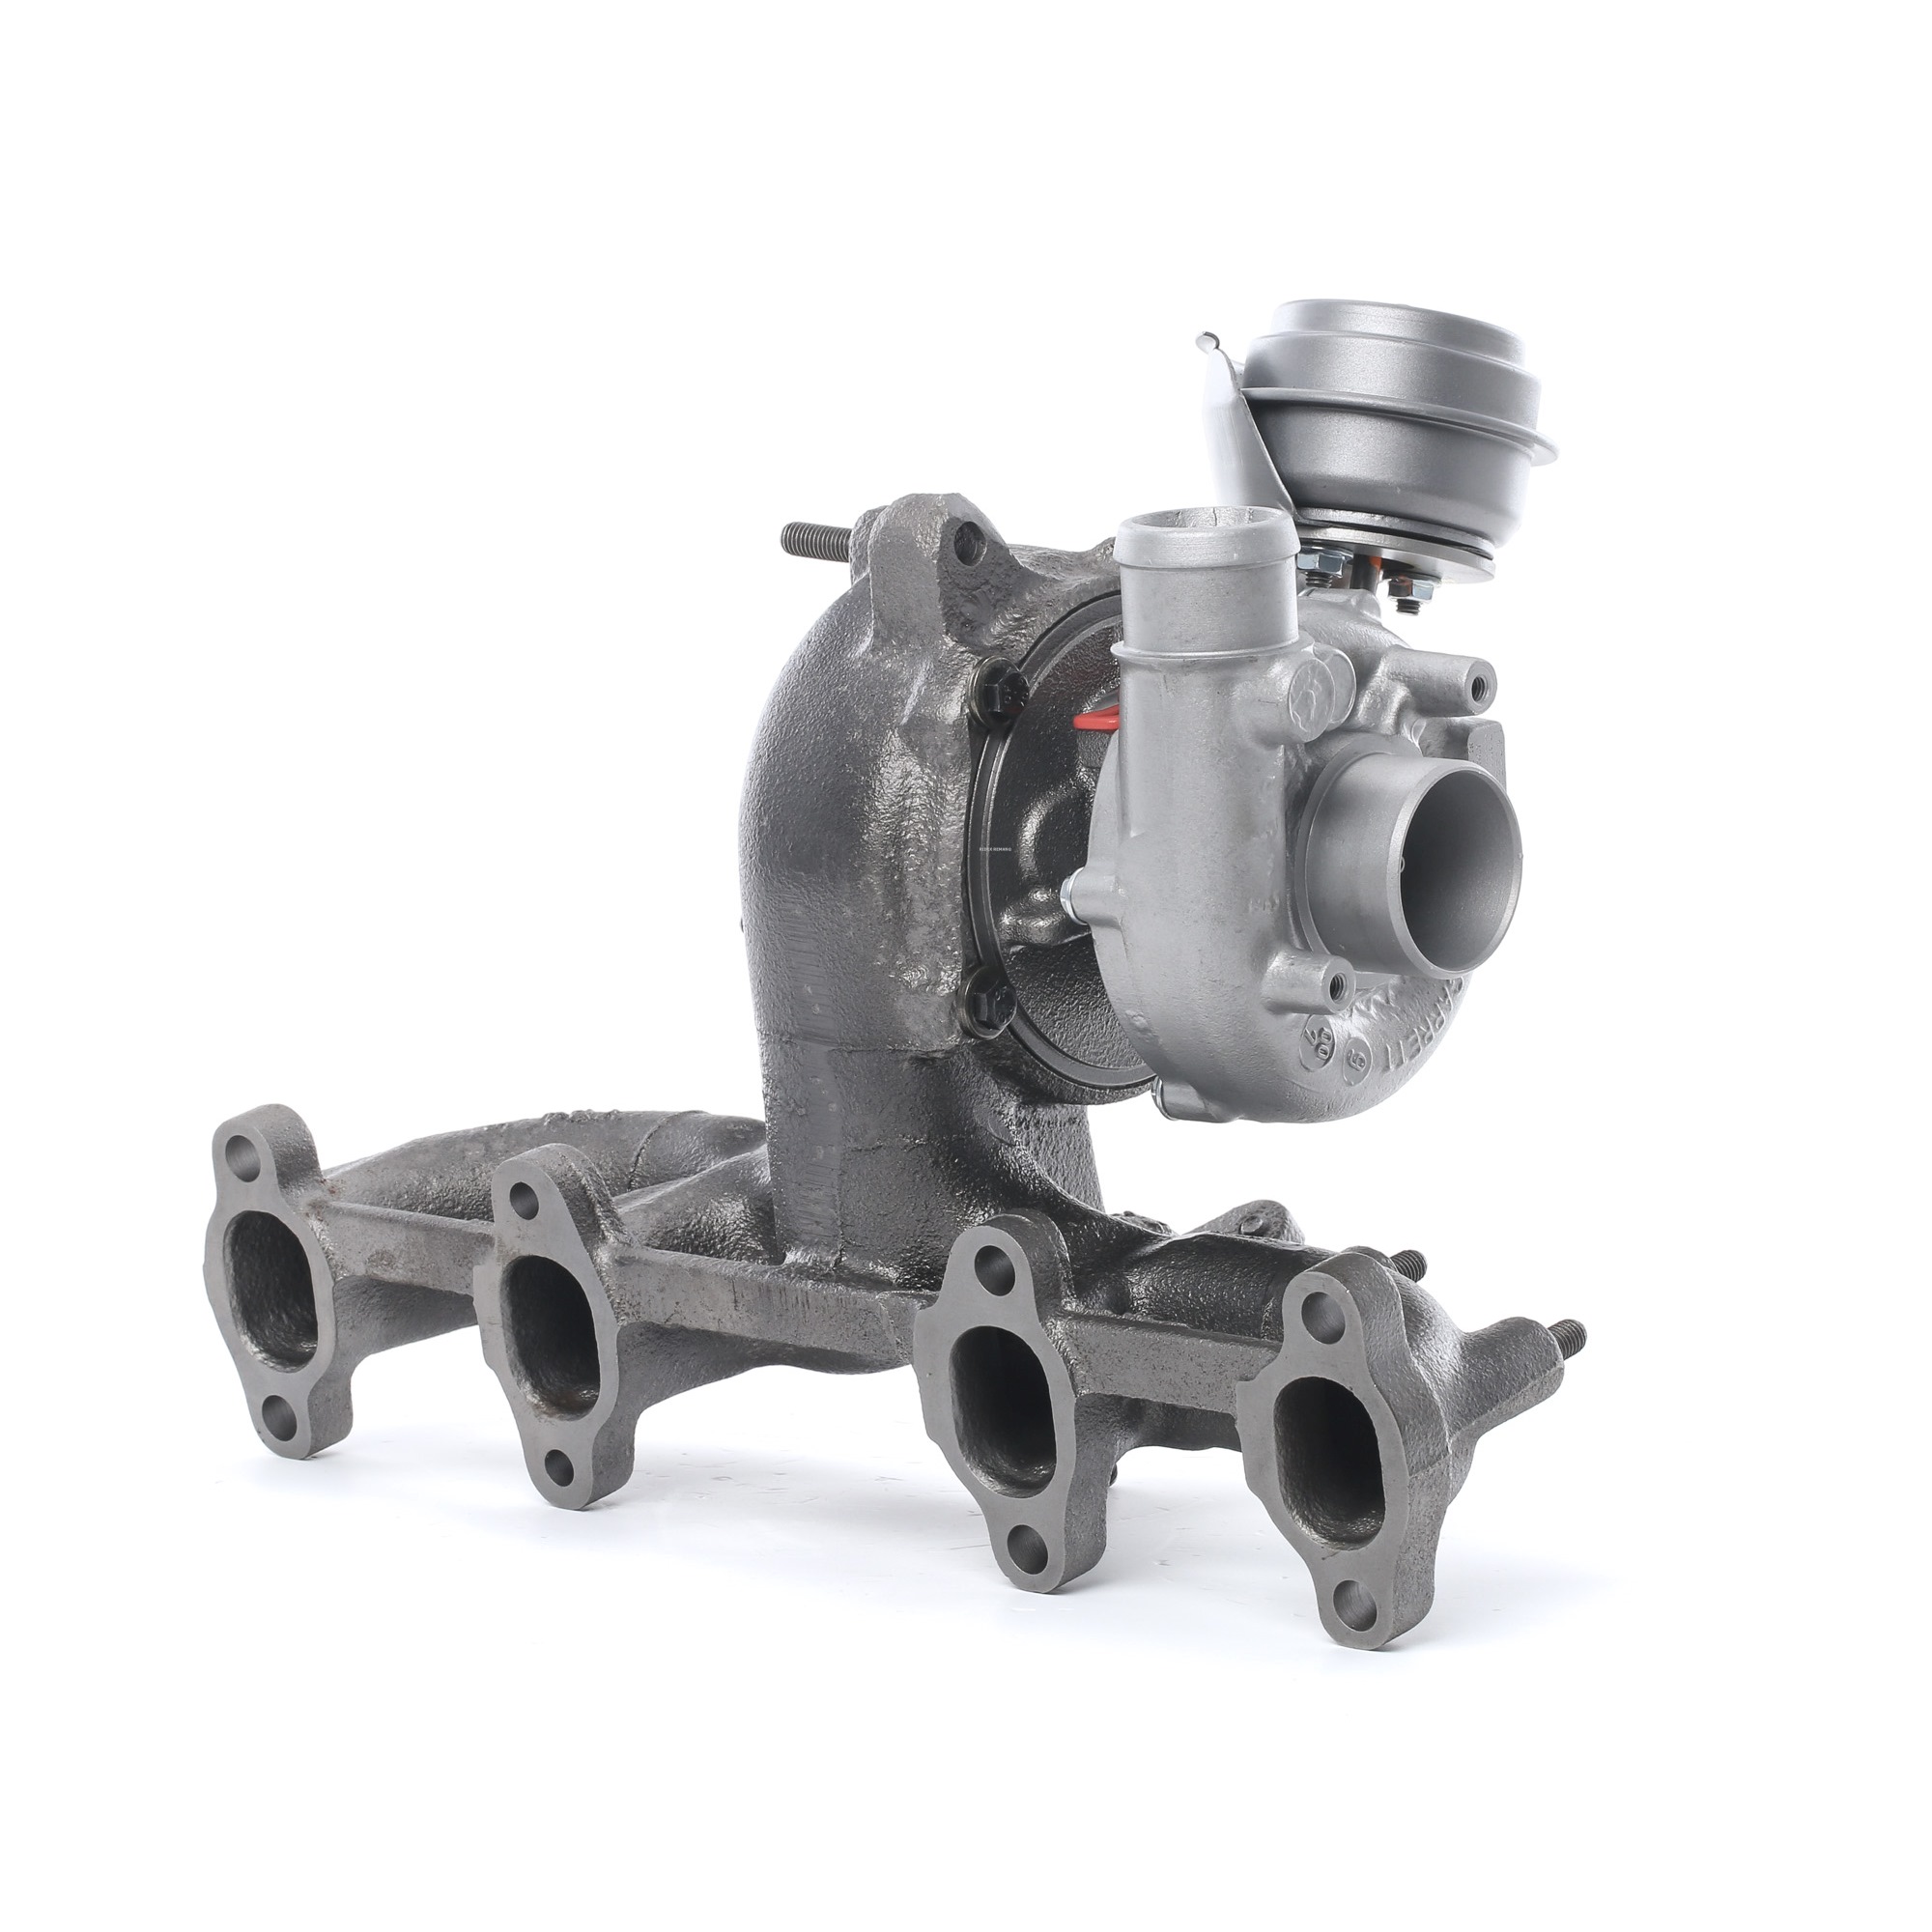 RIDEX REMAN 2234C0166R Turbocharger Exhaust Turbocharger, VNT / VTG, Pneumatic, without attachment material, with mounting manual